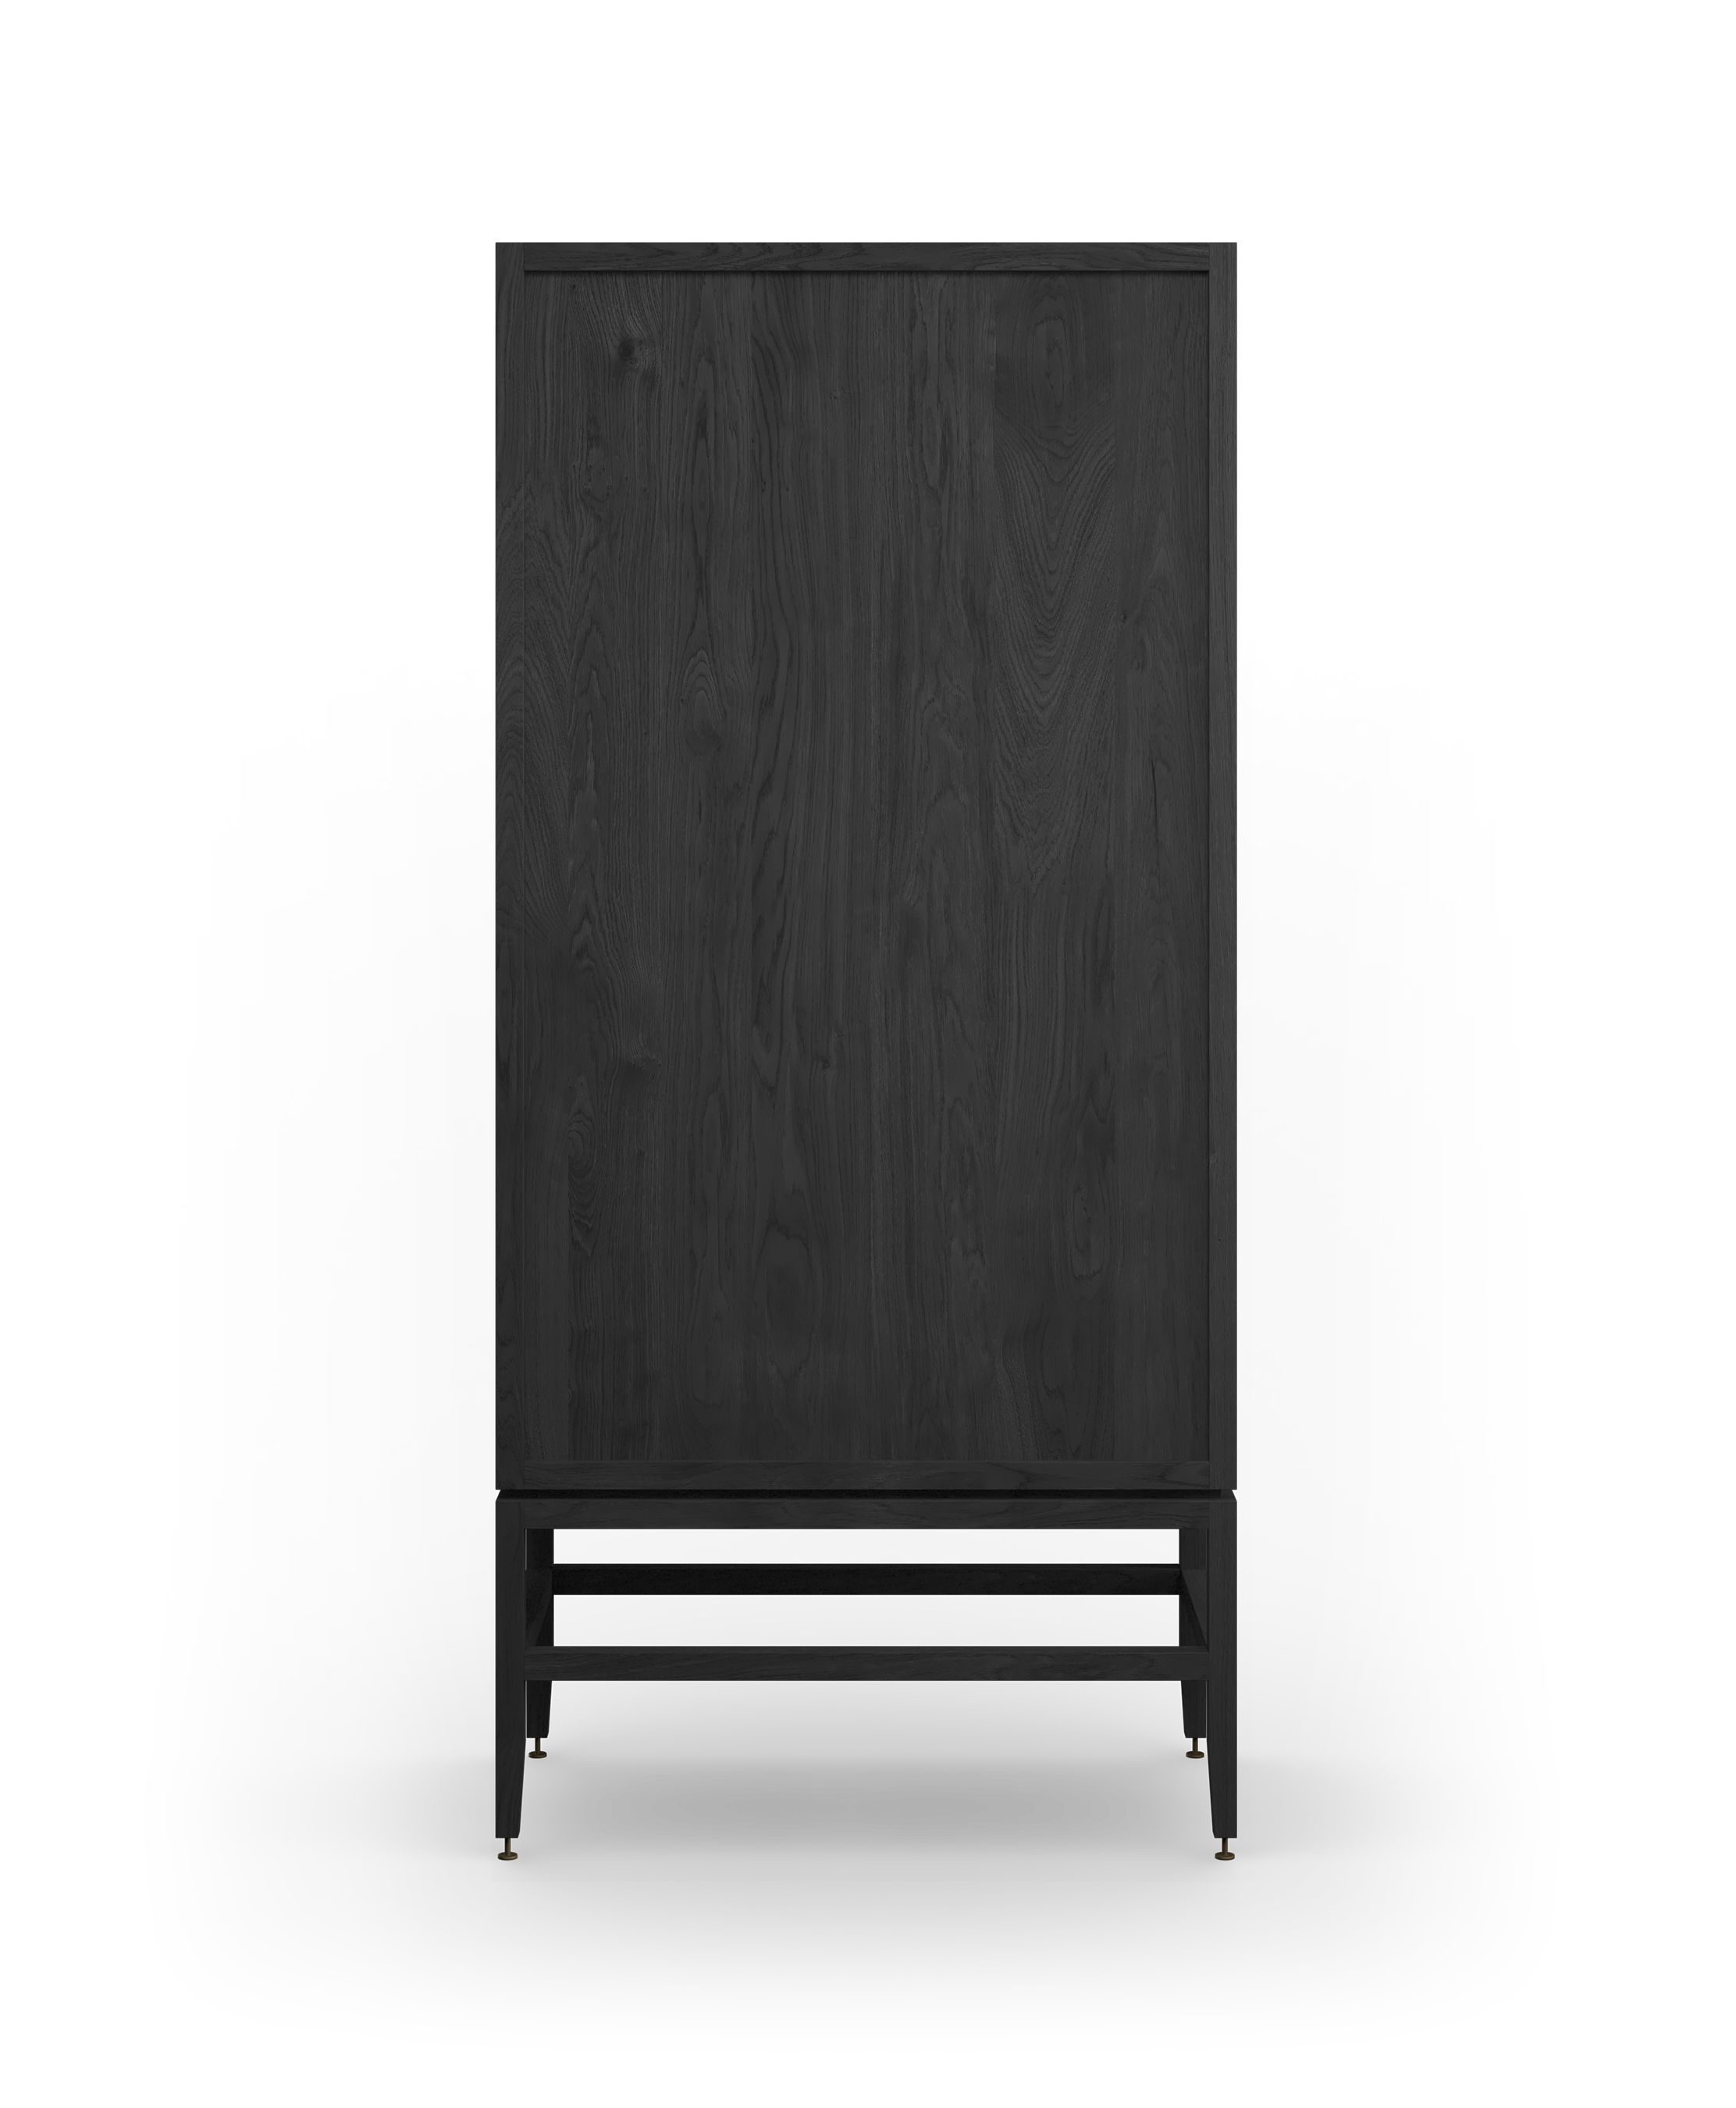 Coquo freestanding armoire in black stained oak with wood doors. Can be used as a pantry, buffet, wardrobe, pharmacy.